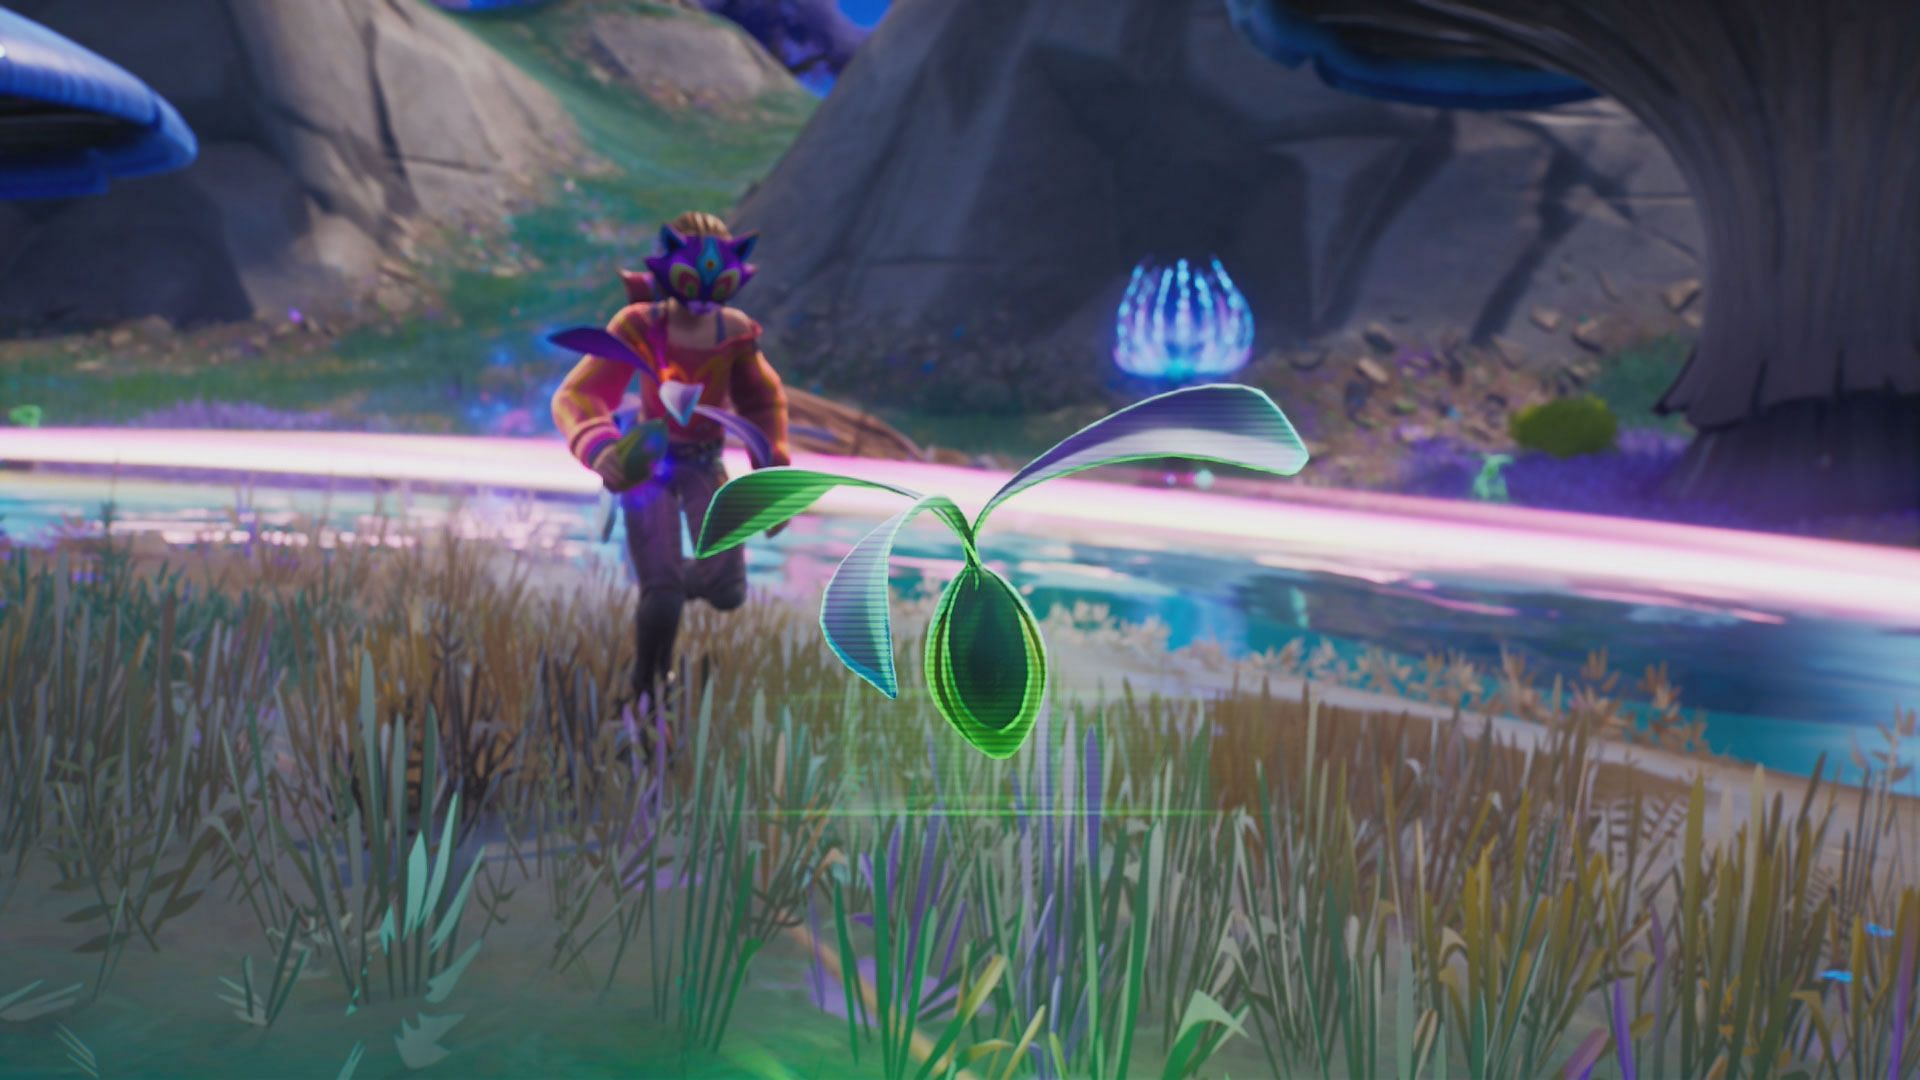 Players can no longer get many Mythic items from Reality Saplings in Fortnite (Image via Epic Games)